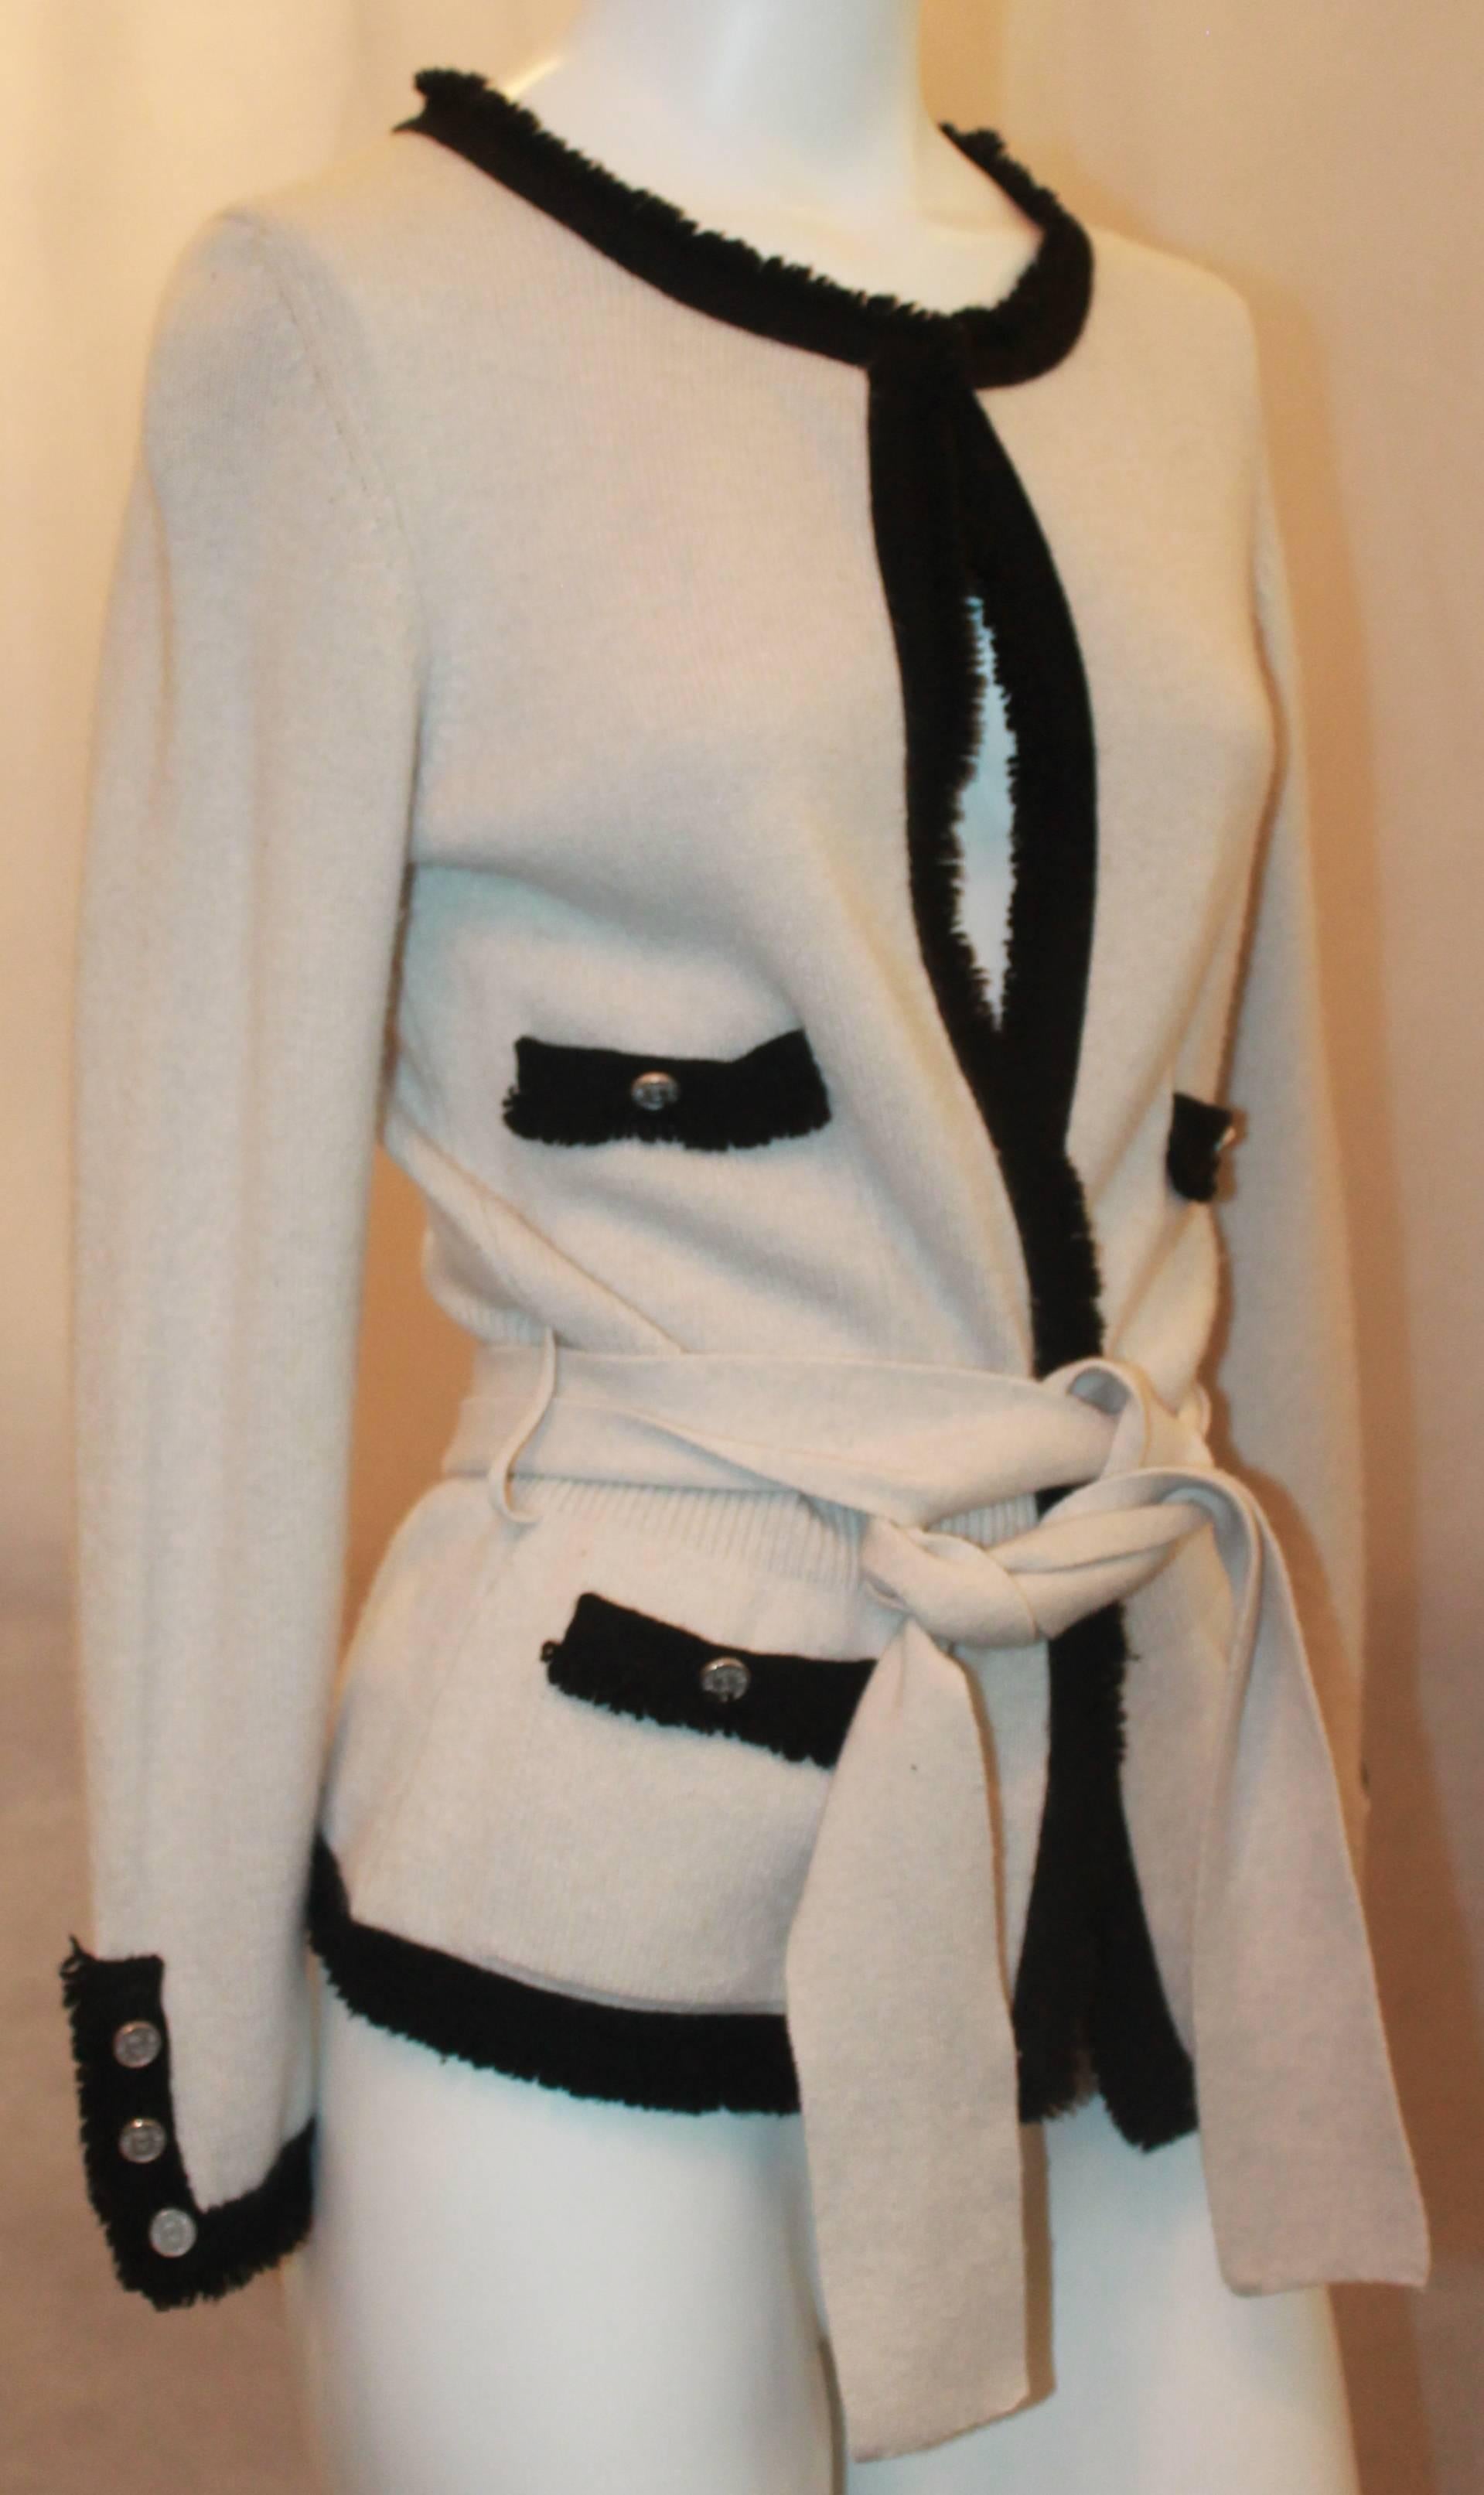 Chanel Cream Cashmere Sweater w/ Black Fringe Trim & Belt Sash - 38.  This beautiful sweater is in very good condition with only slight pilling.  It features a lovely black fringe trim, 4 front pockets, and a belt sash.  Its buttons feature the